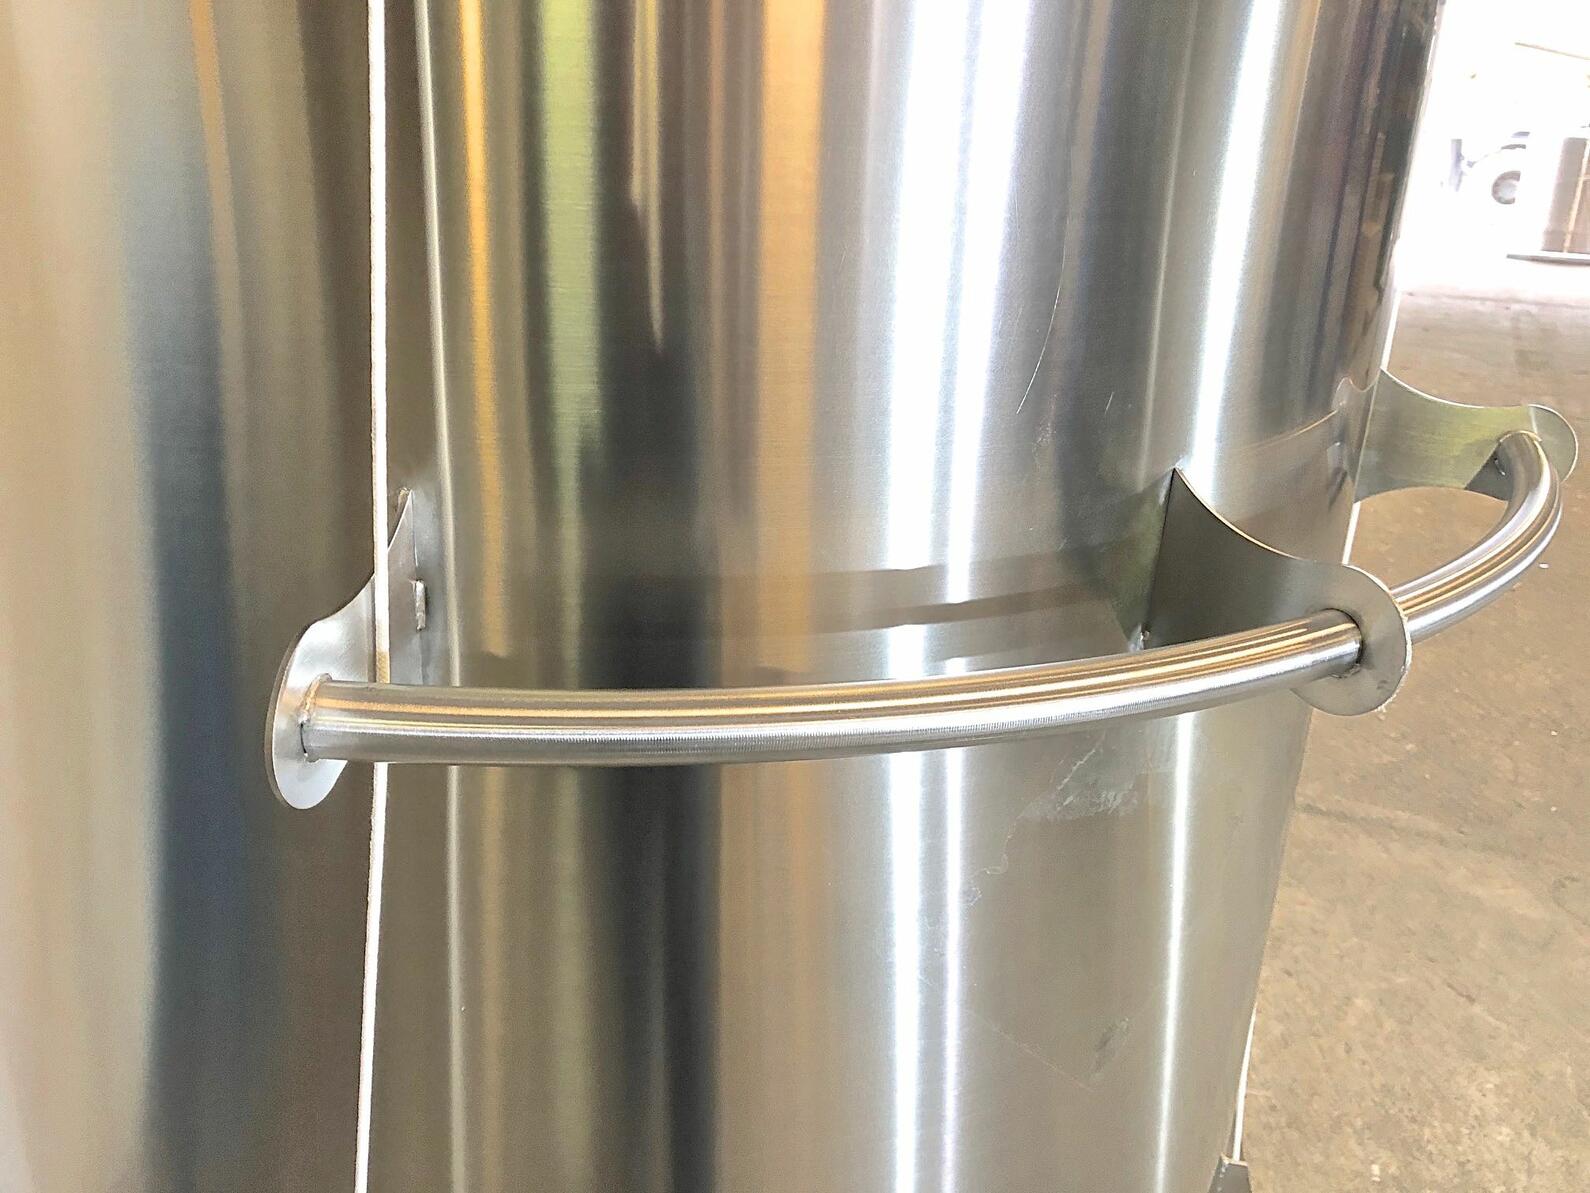 316 stainless steel tank - Model SCL1250